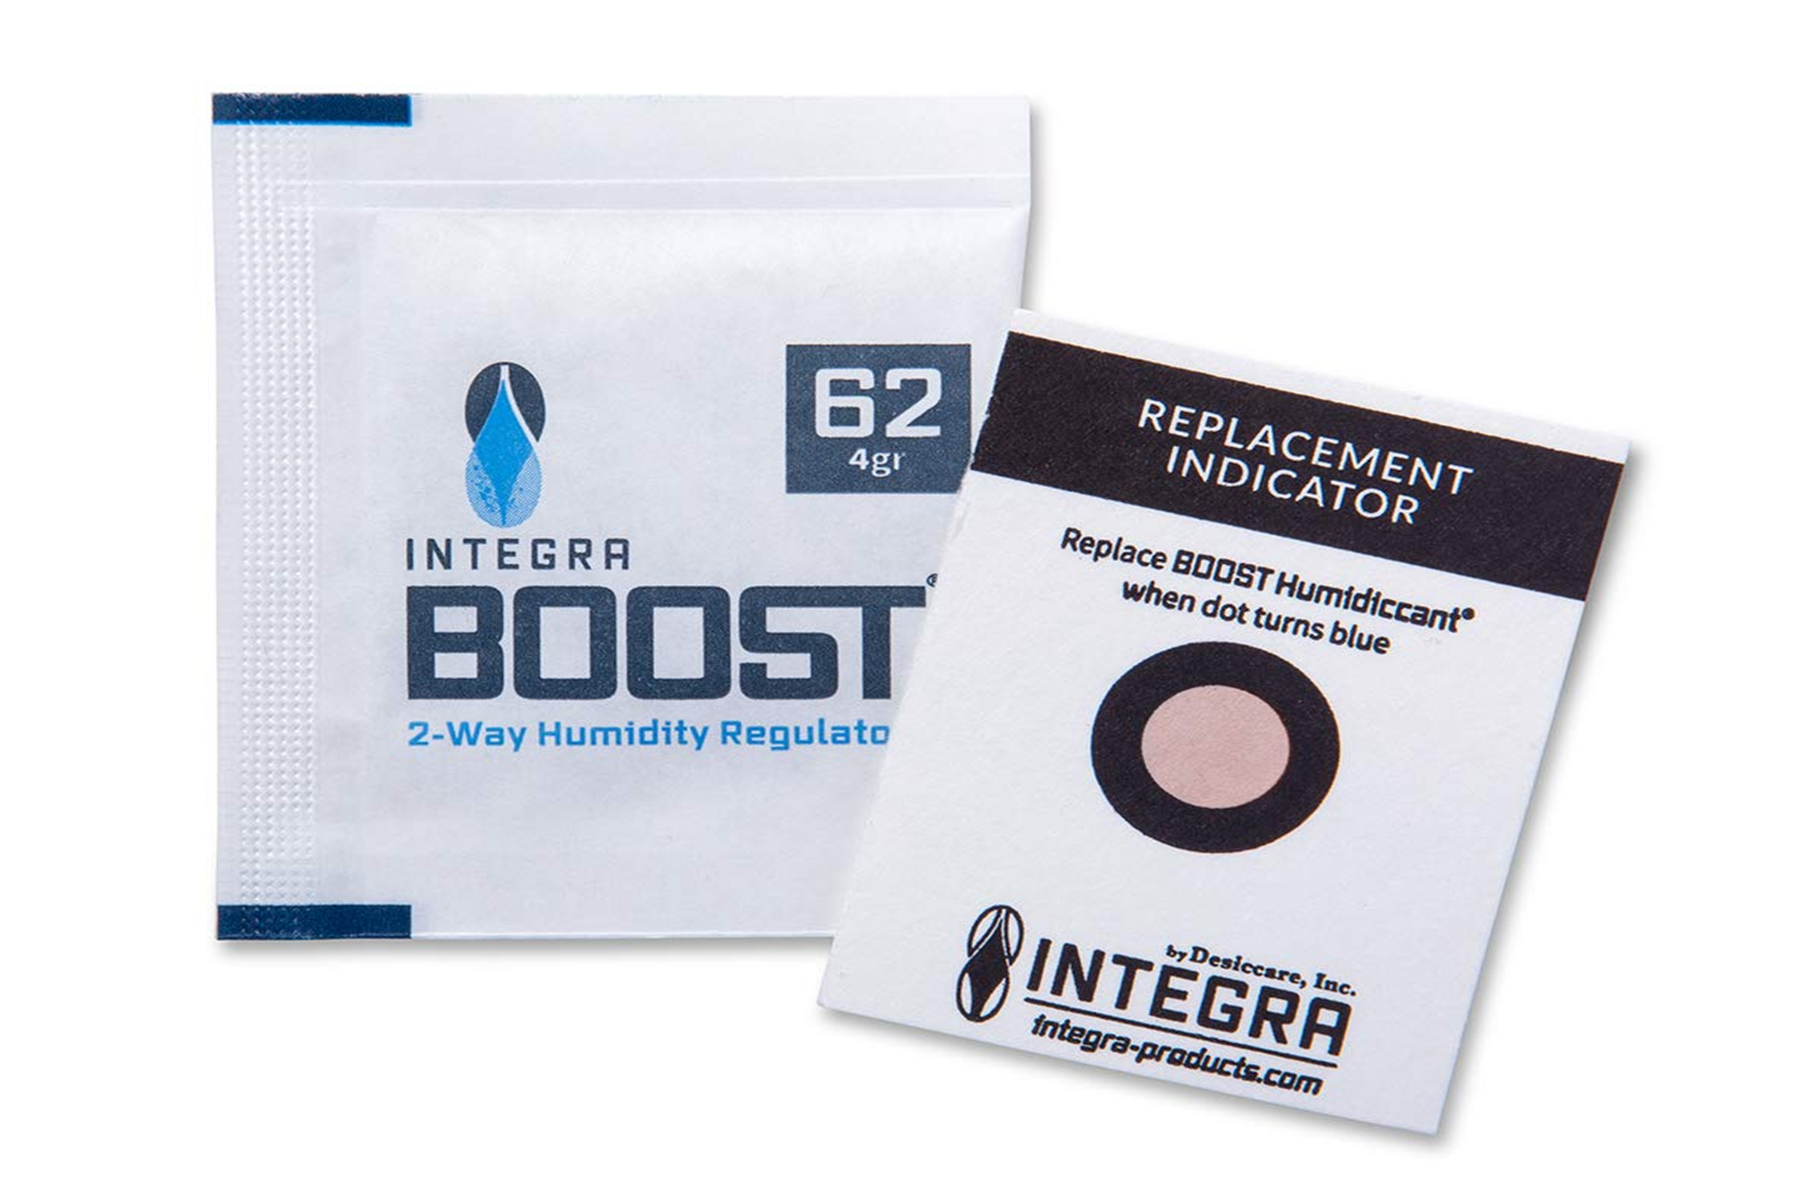 Desiccare 8-gram Integra BOOST® 62% RH 2-way humidity control packs with HIC